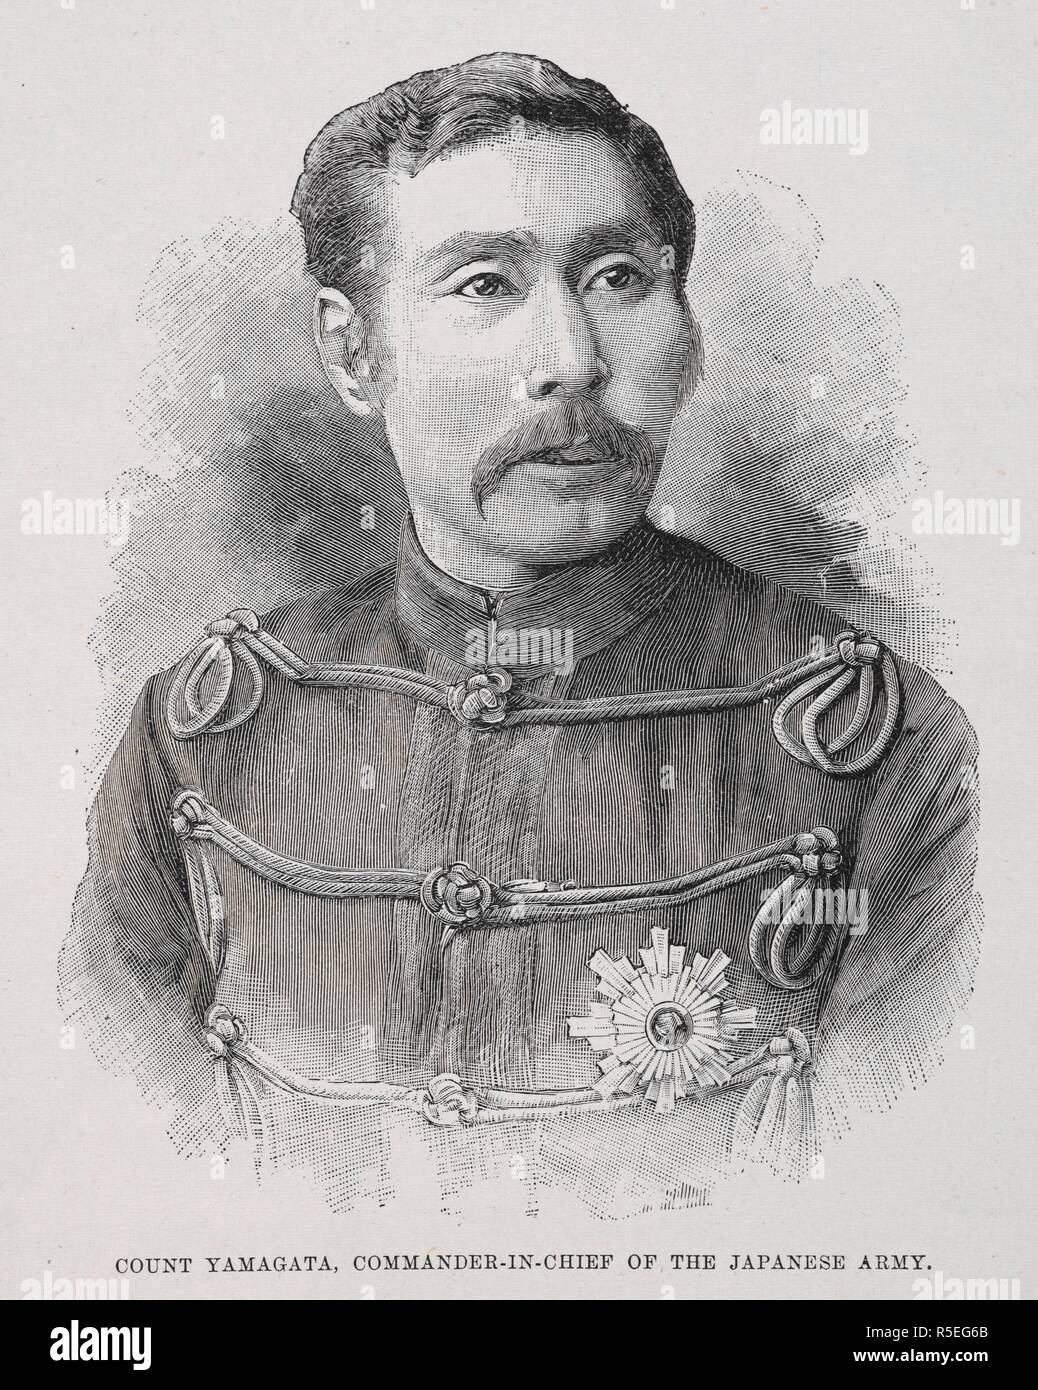 'Count Yamagata, commander-in-chief of the Japanese army'. Portrait. Field Marshal Prince Yamagata Aritomo (14 June 1838 â€“ 1 February 1922), also known as Yamagata KyÅsuke, was a field marshal in the Imperial Japanese Army and twice Prime Minister of Japan. He is considered one of the architects of the military and political foundations of early modern Japan. Yamagata Aritomo can be seen as the father of Japanese militarism. Illustrated London News. London, 1894. Source: Illustrated london News, 6 October 1894, page 431. Stock Photo